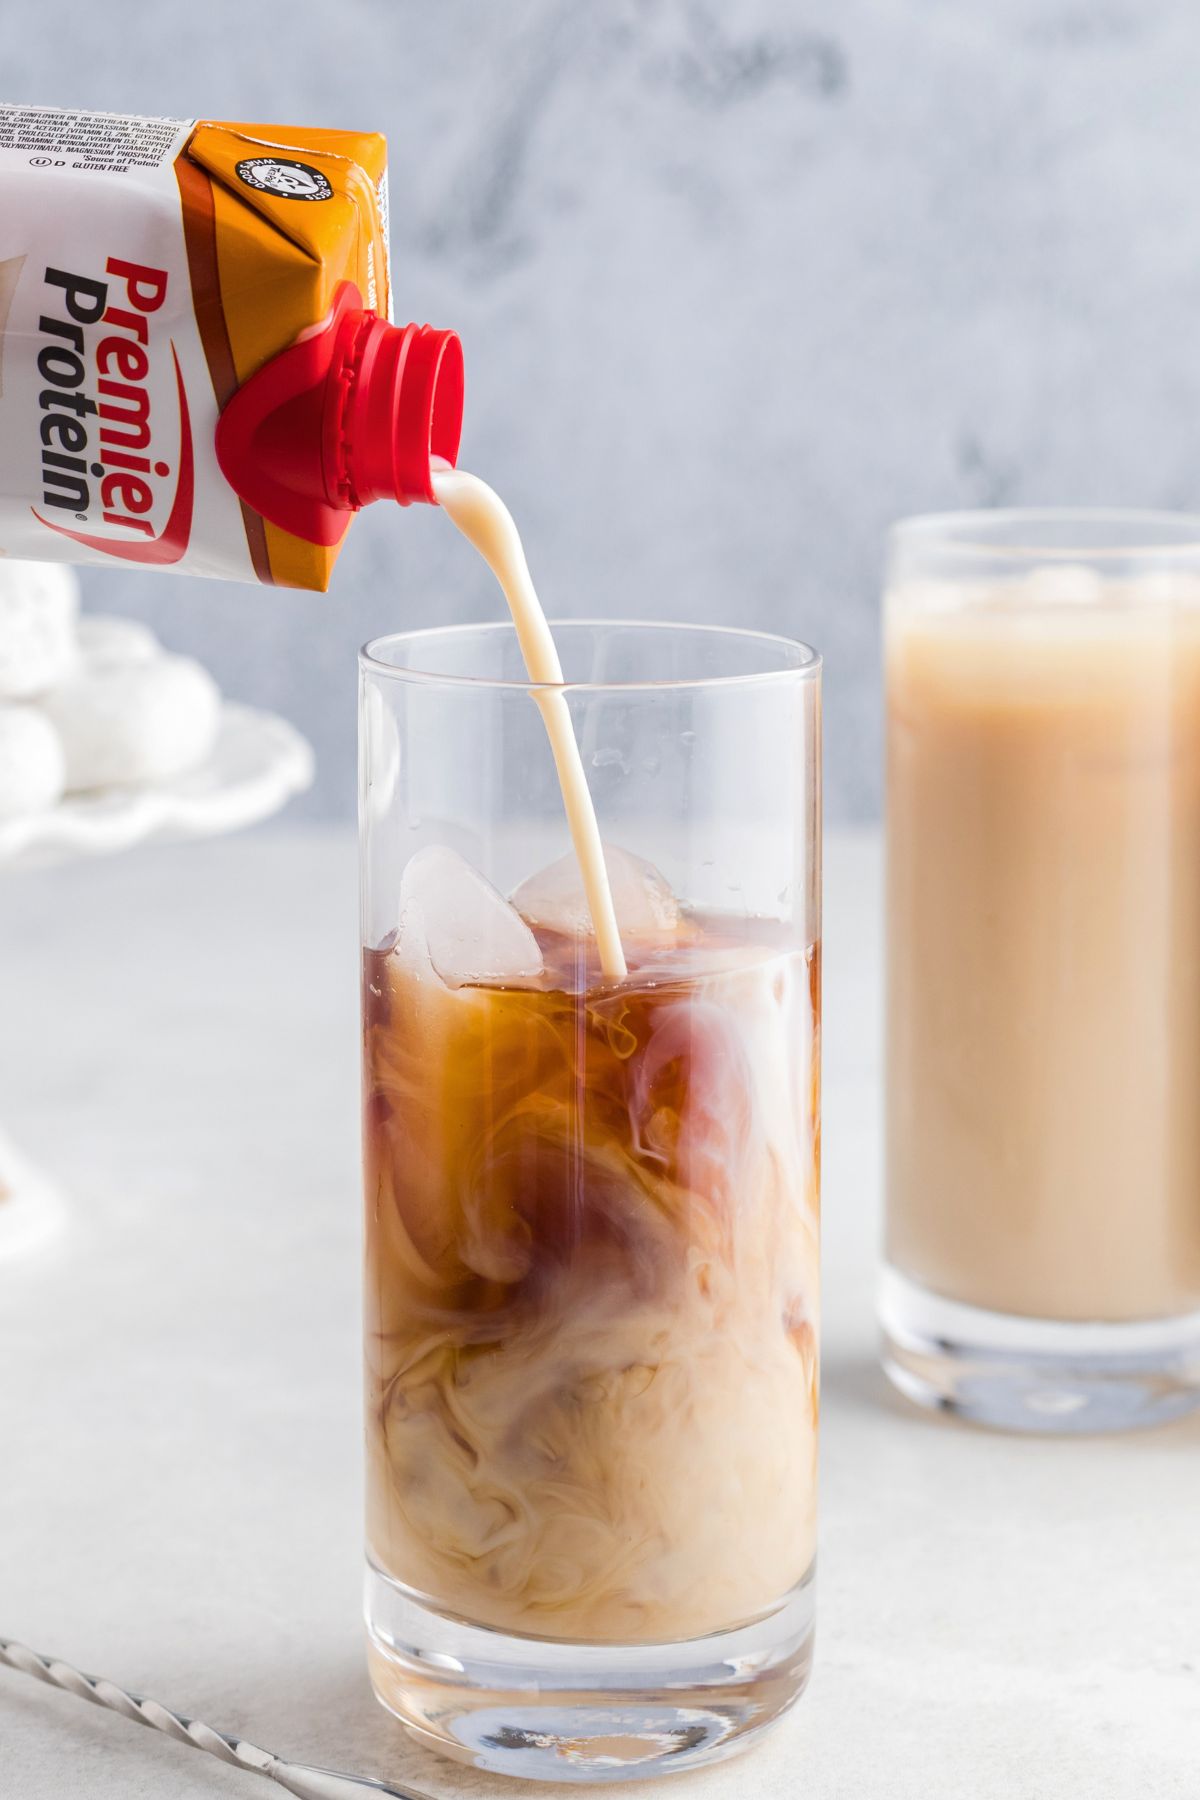 Protein shake being poured over cold coffee and ice cubes.